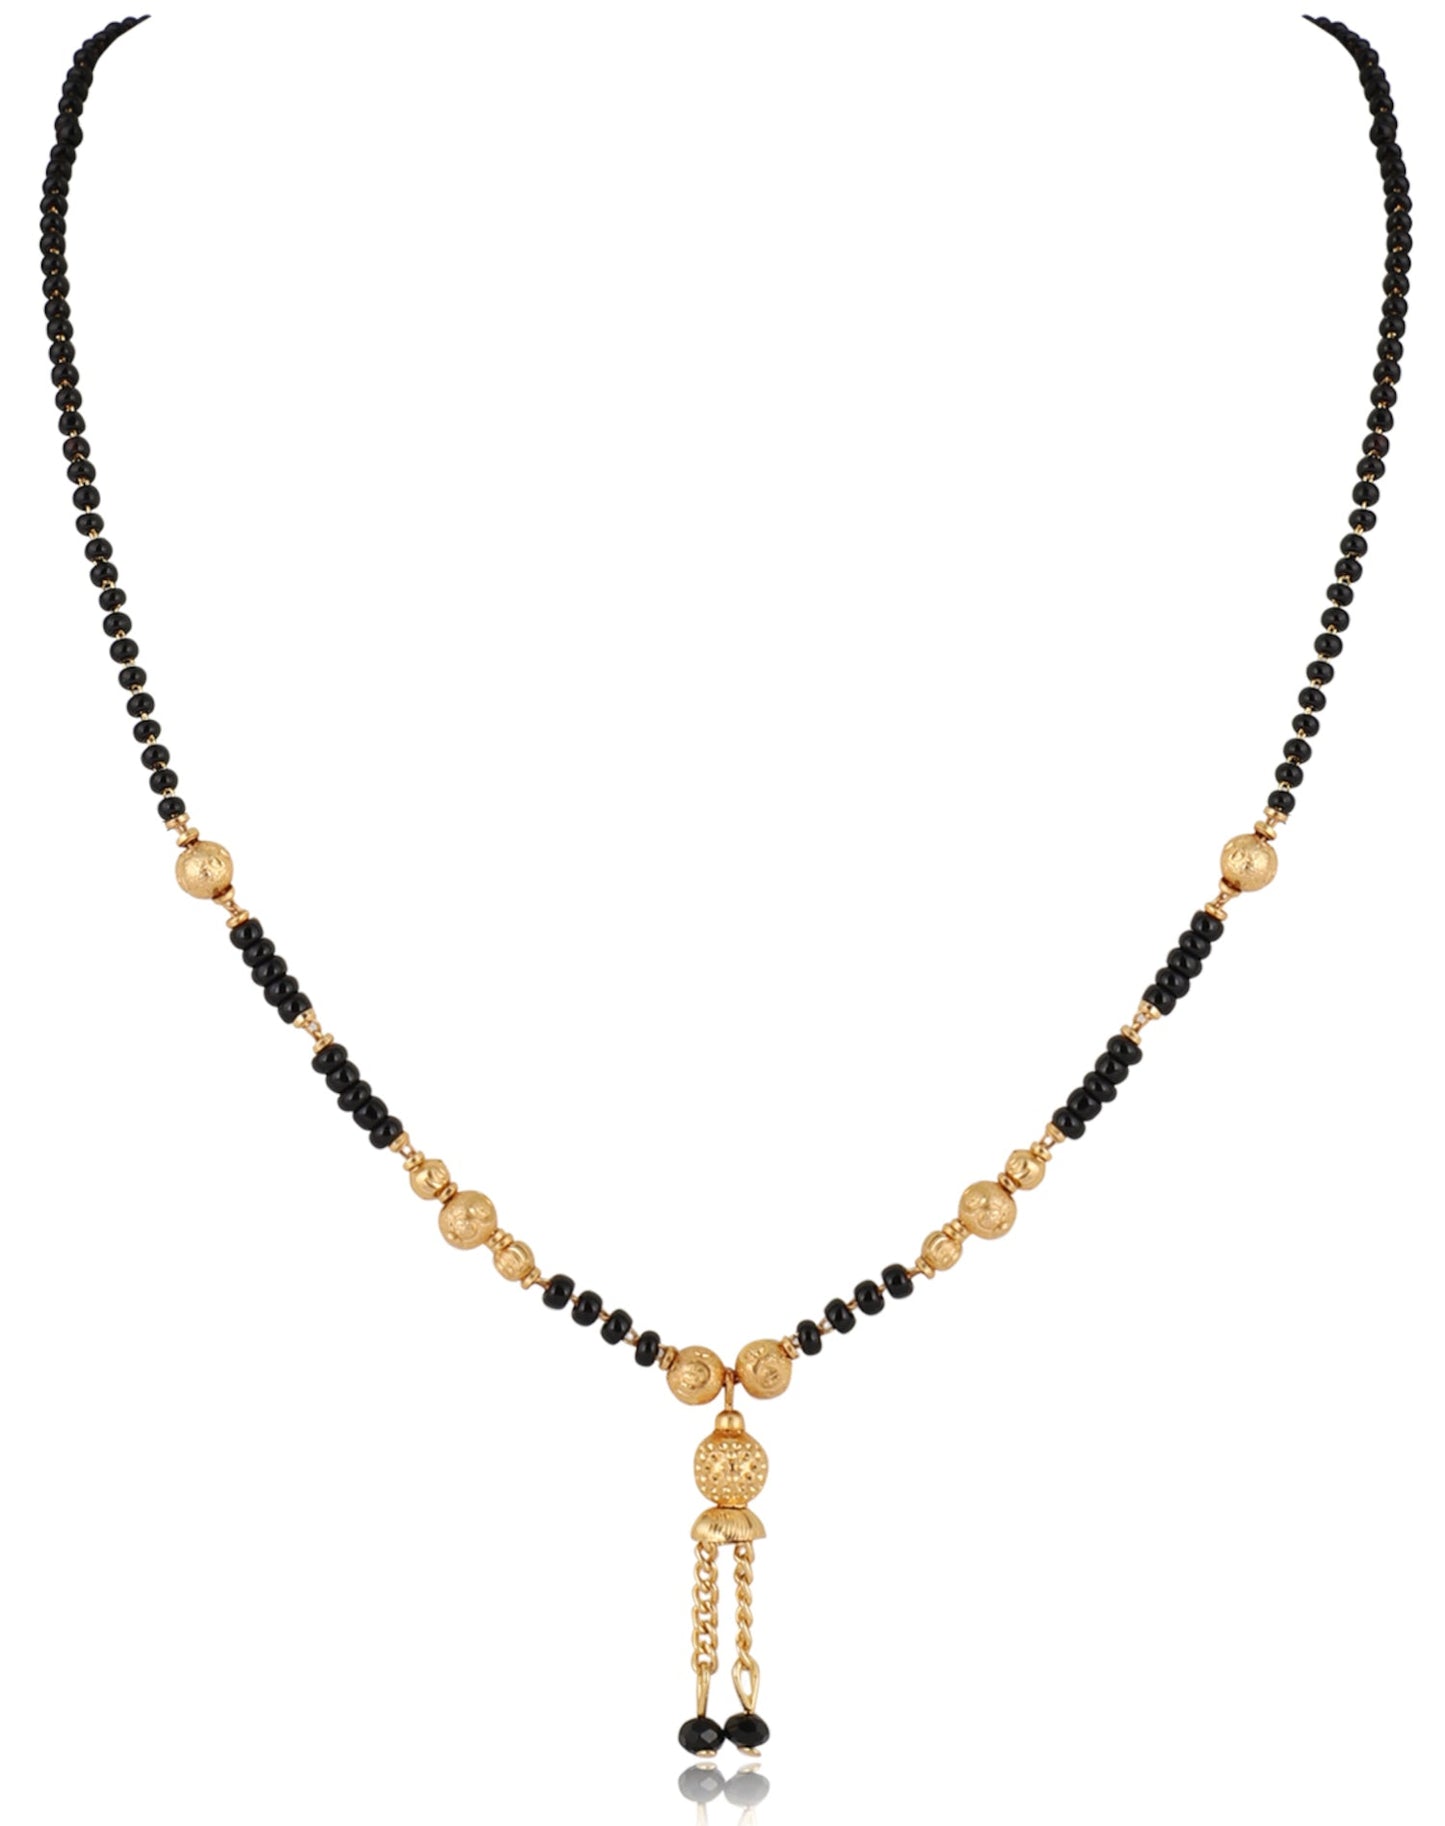 Traditional Gold Plated Mangalsutra | Buy This Jewellery Online from Mekkna